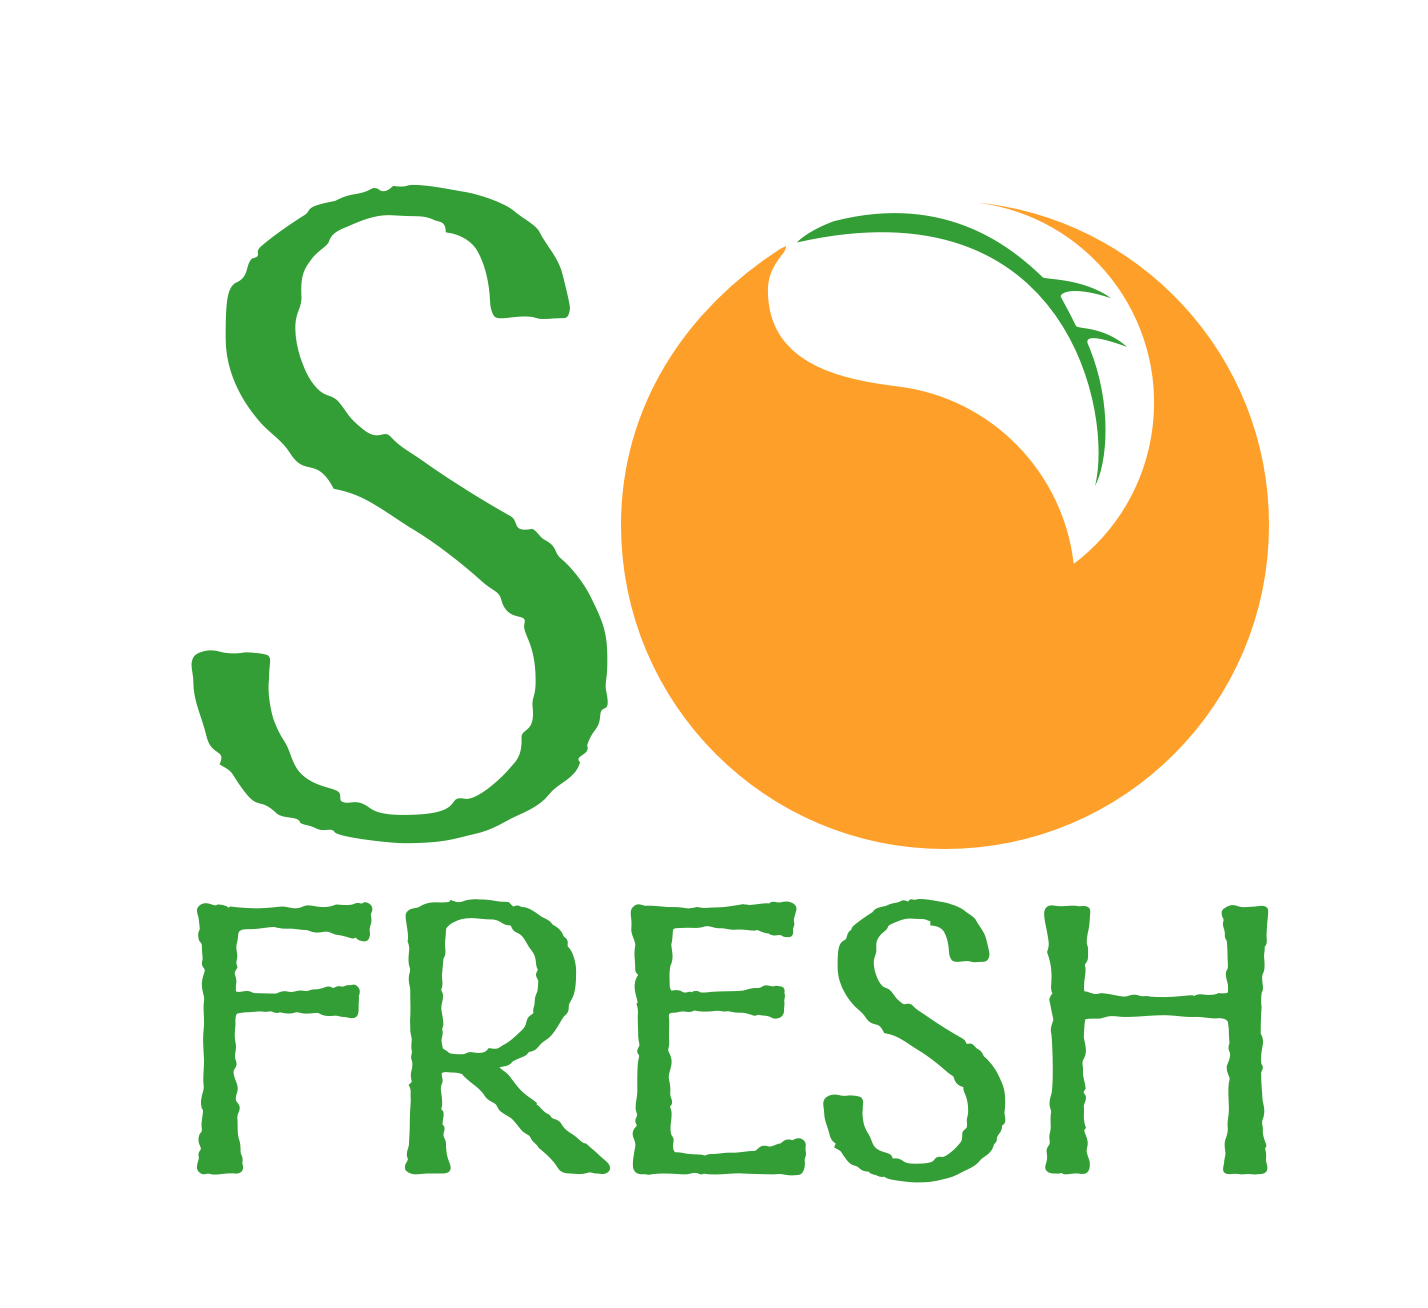 So Fresh coupon codes, promo codes and deals